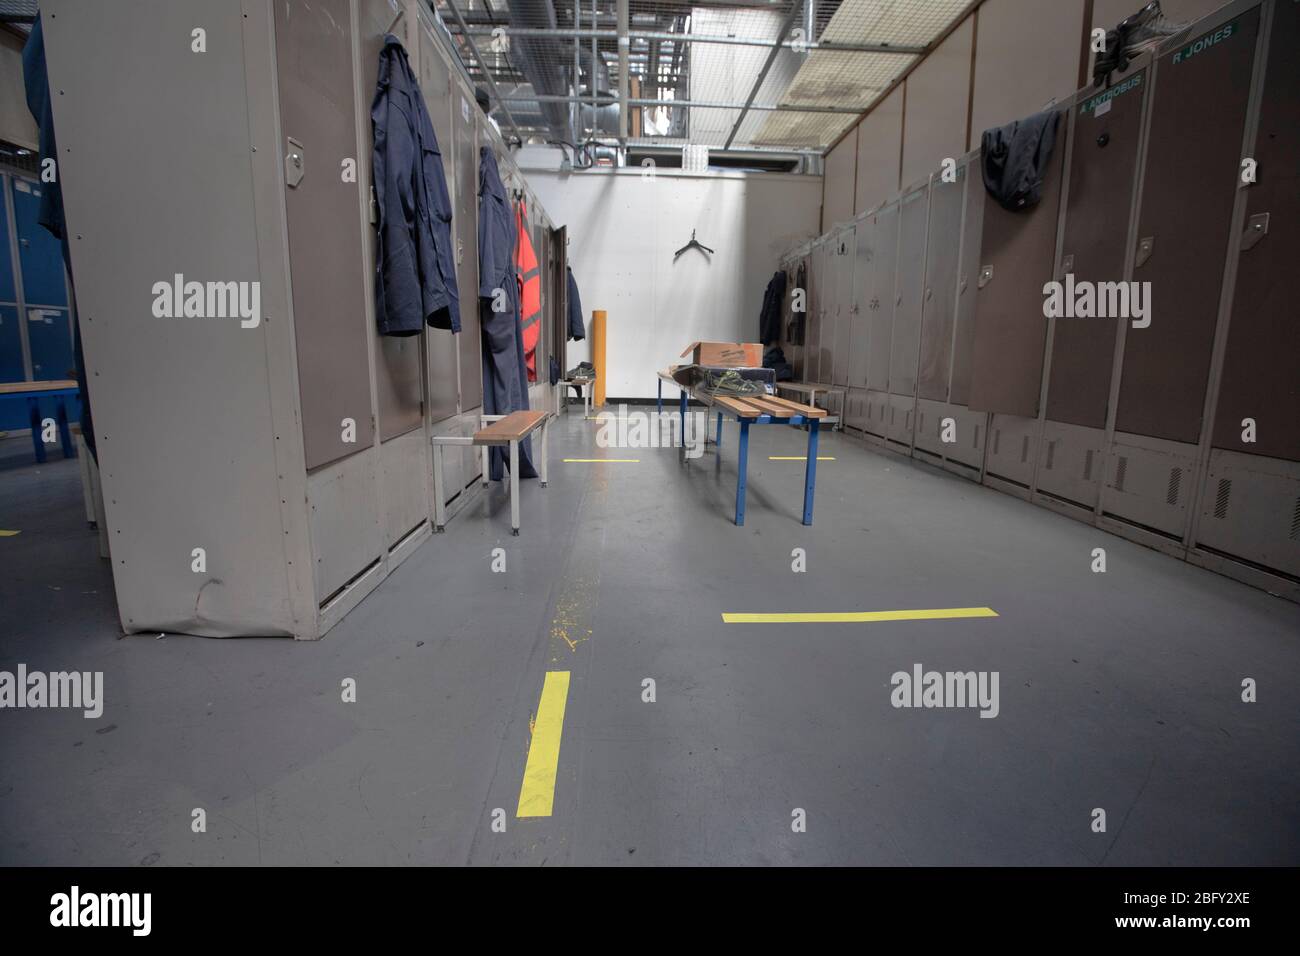 A workers locker room with floor markings at the Vauxhall car factory photographed undergoing preparedness tests and redesign ahead of re-opening following the COVID-19 outbreak. Located in Ellesmere Port, Wirral, the factory opened in 1962 and currently employs around 1100 workers. It ceased production on 17 March 2020 and will only resume work upon the advice of the UK Government, which will involve stringent physical distancing measures being in place across the site. Stock Photo